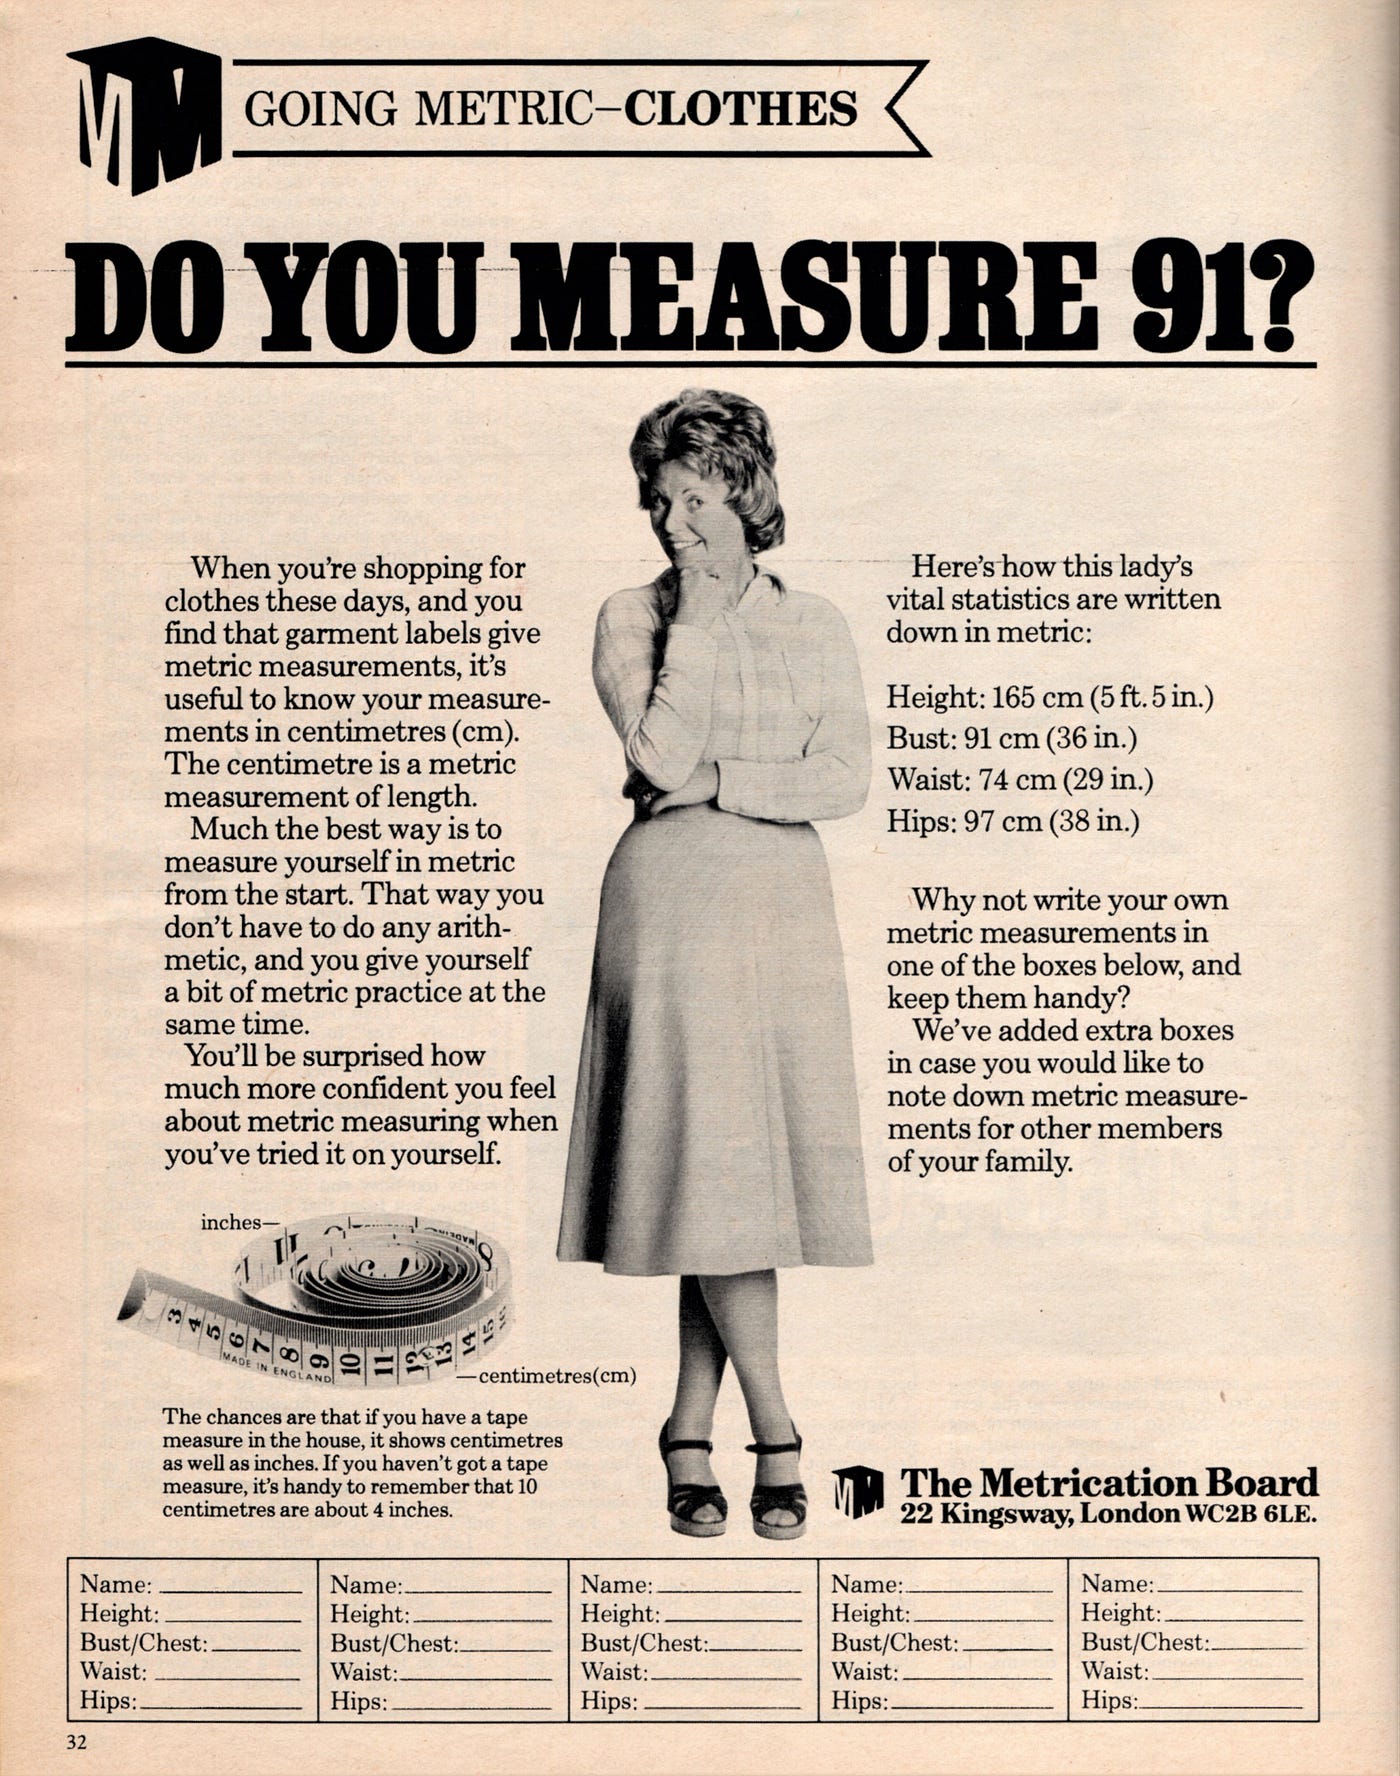 A short history of U.S. white women's measurements used for